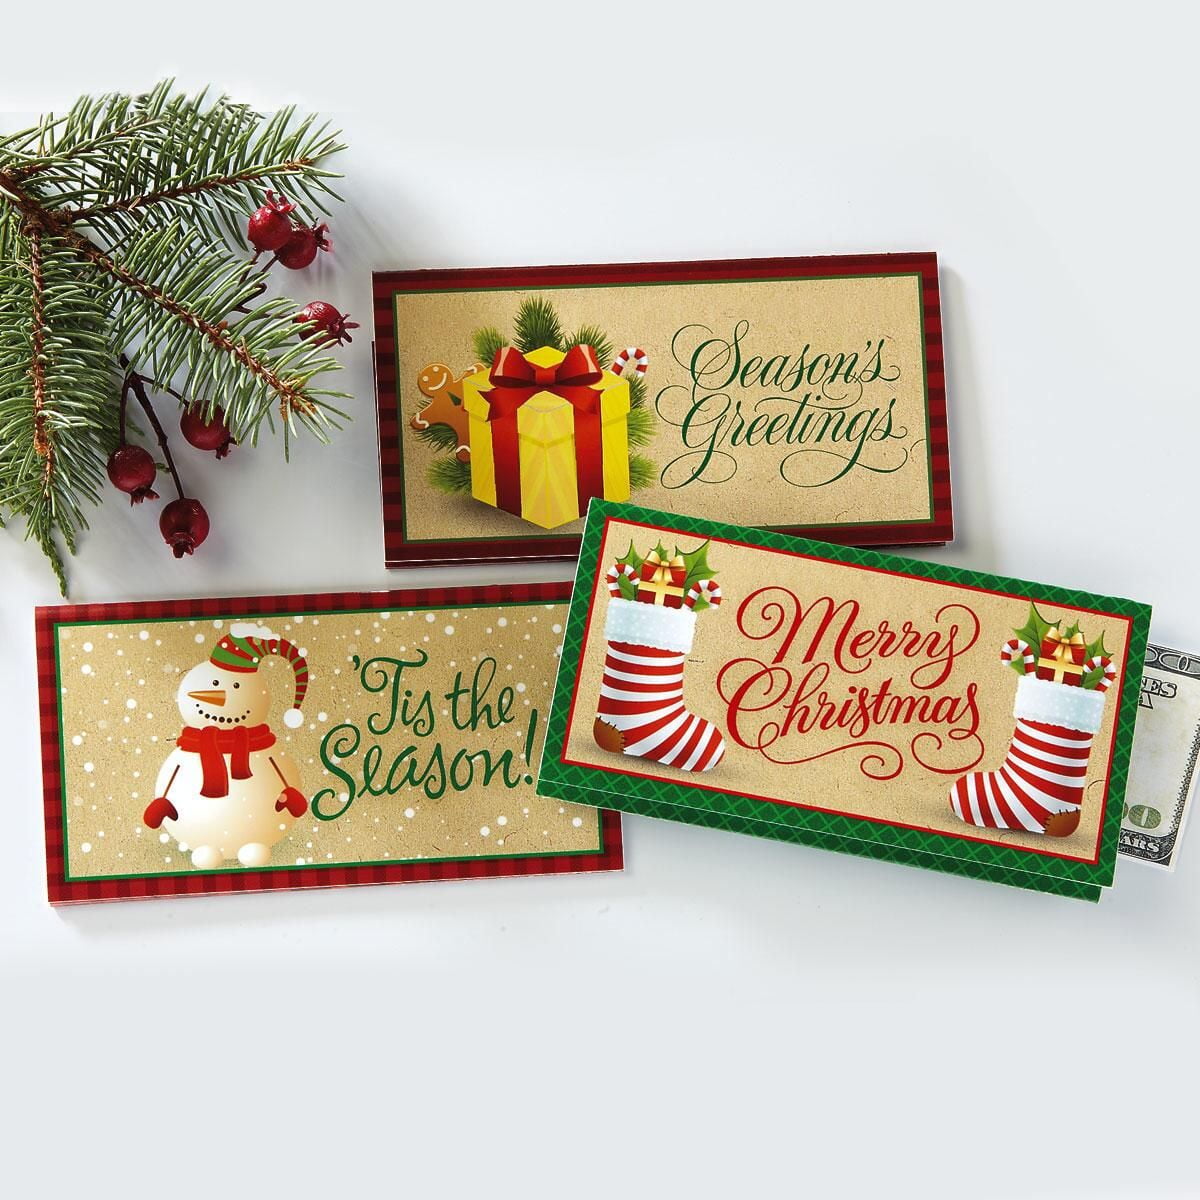 MONEY HOLDER FESTIVE WISHES ORNAMENTS CHRISTMAS CARDS WALLETS 6PK GIFT CARD 